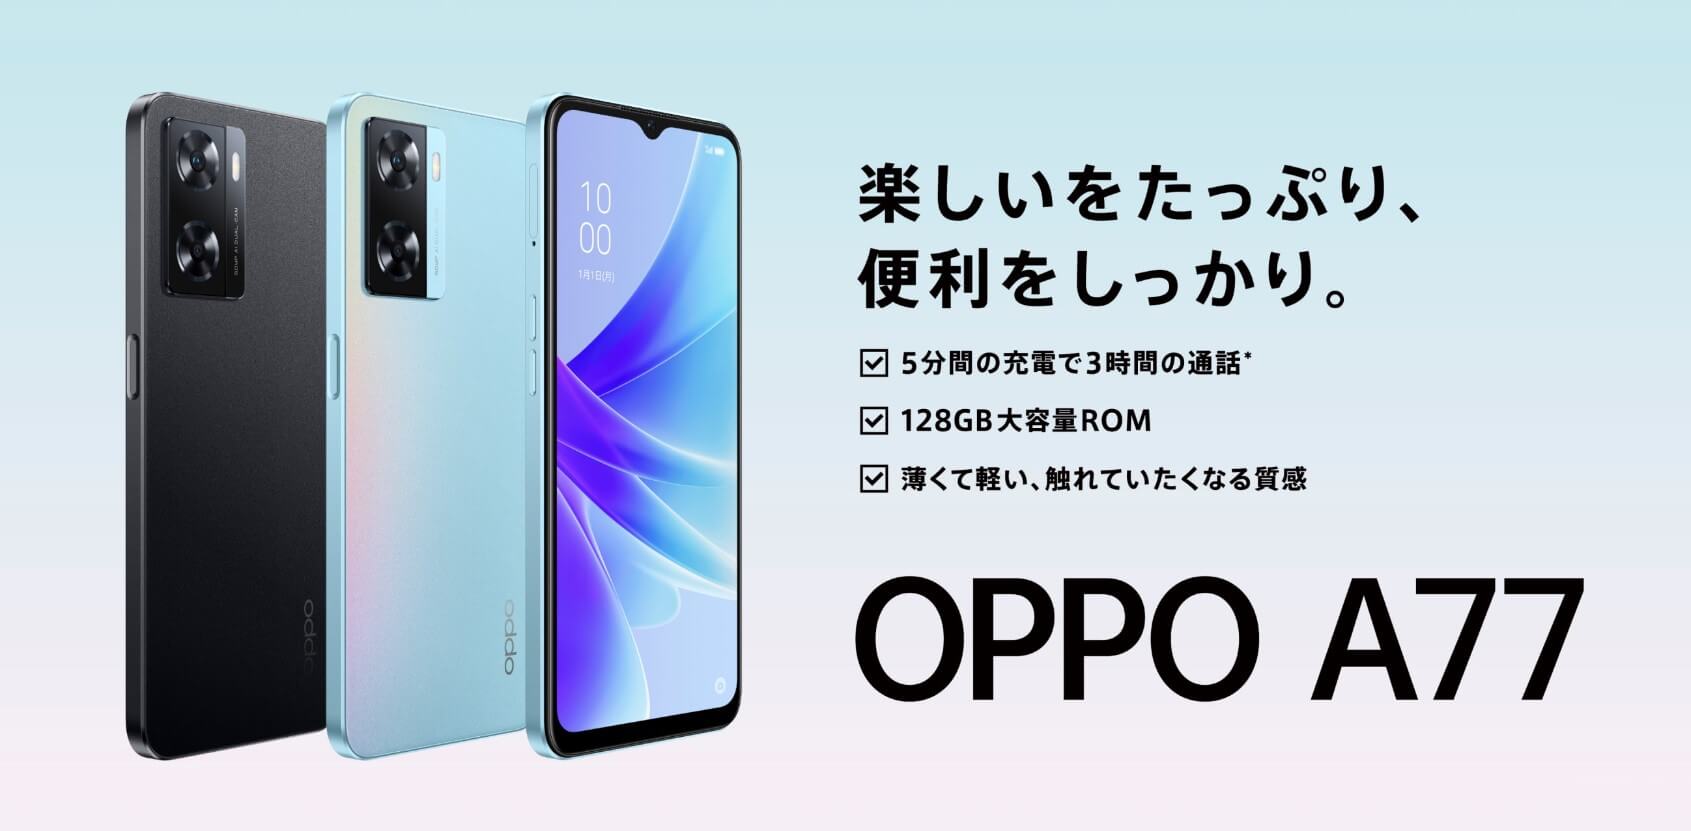 OPPO A77は国内AndroidでBluetooth 5.3初対応！？処理能力以外の部分で 